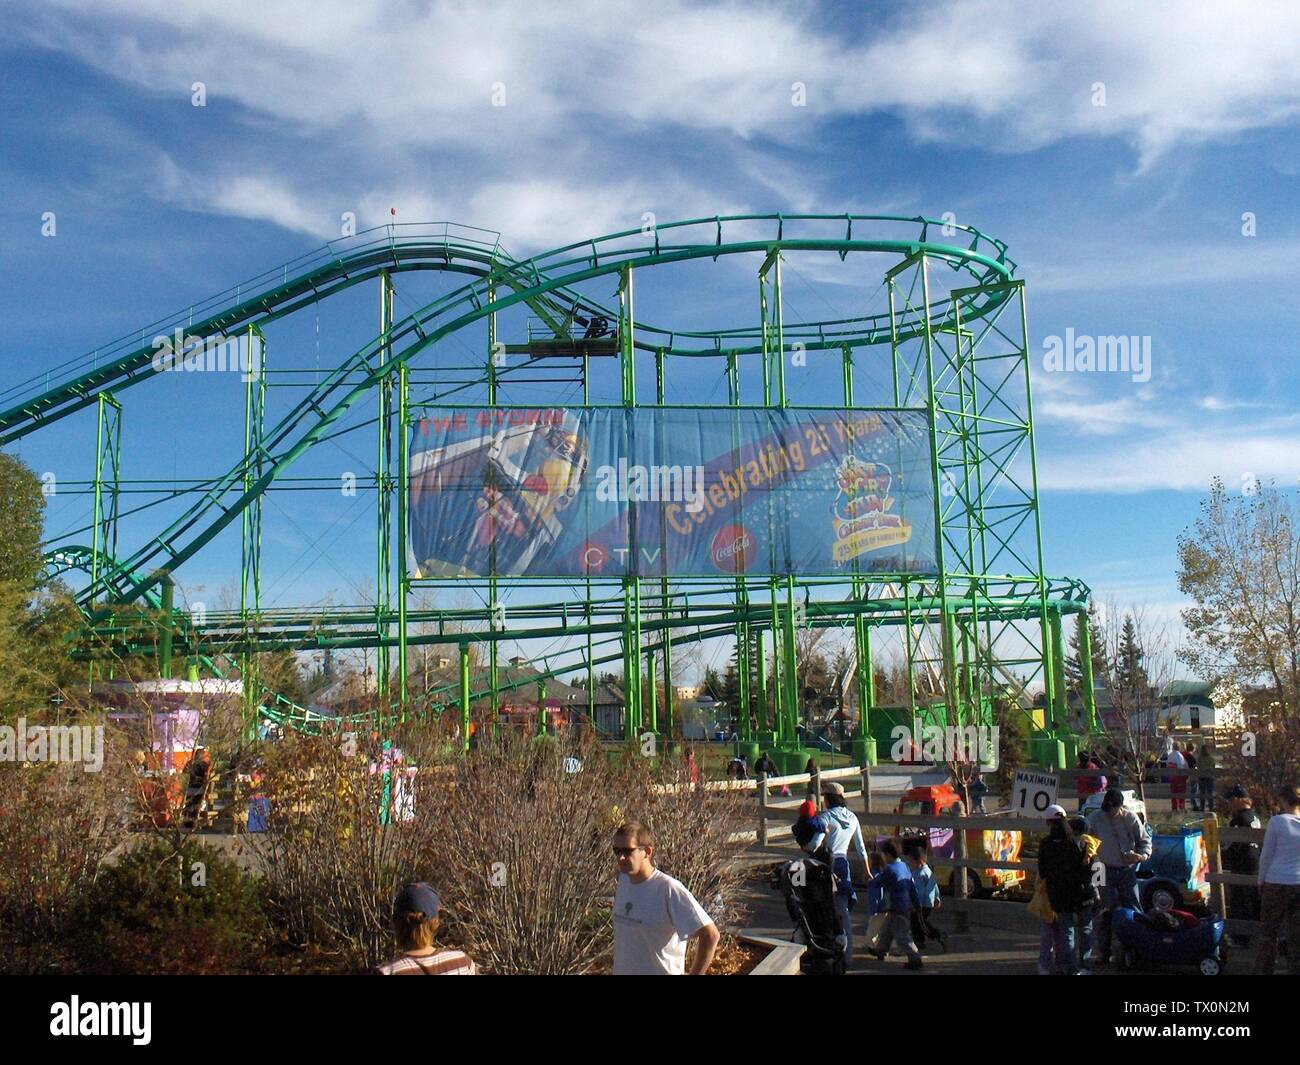 Calaway Park (Calgary, Canada) - A banner of Calaway celebrating it's 25th Anniversary with the new ride Storm, posted on Vortex's (the roller coaster) side railings. Other rides are shown, including Swirly Twirl (left), Super Trucks (right) and Ocean Motion in the background. The Calaway Cafe is shown behind vortex (gray-roofed building), and the Guest Services booth to the right of it (smaller white building).; 9 October 2006; Own work (Original text:  Picture shot by employee (ride operator) of Calaway); Jonathan Verge; Stock Photo